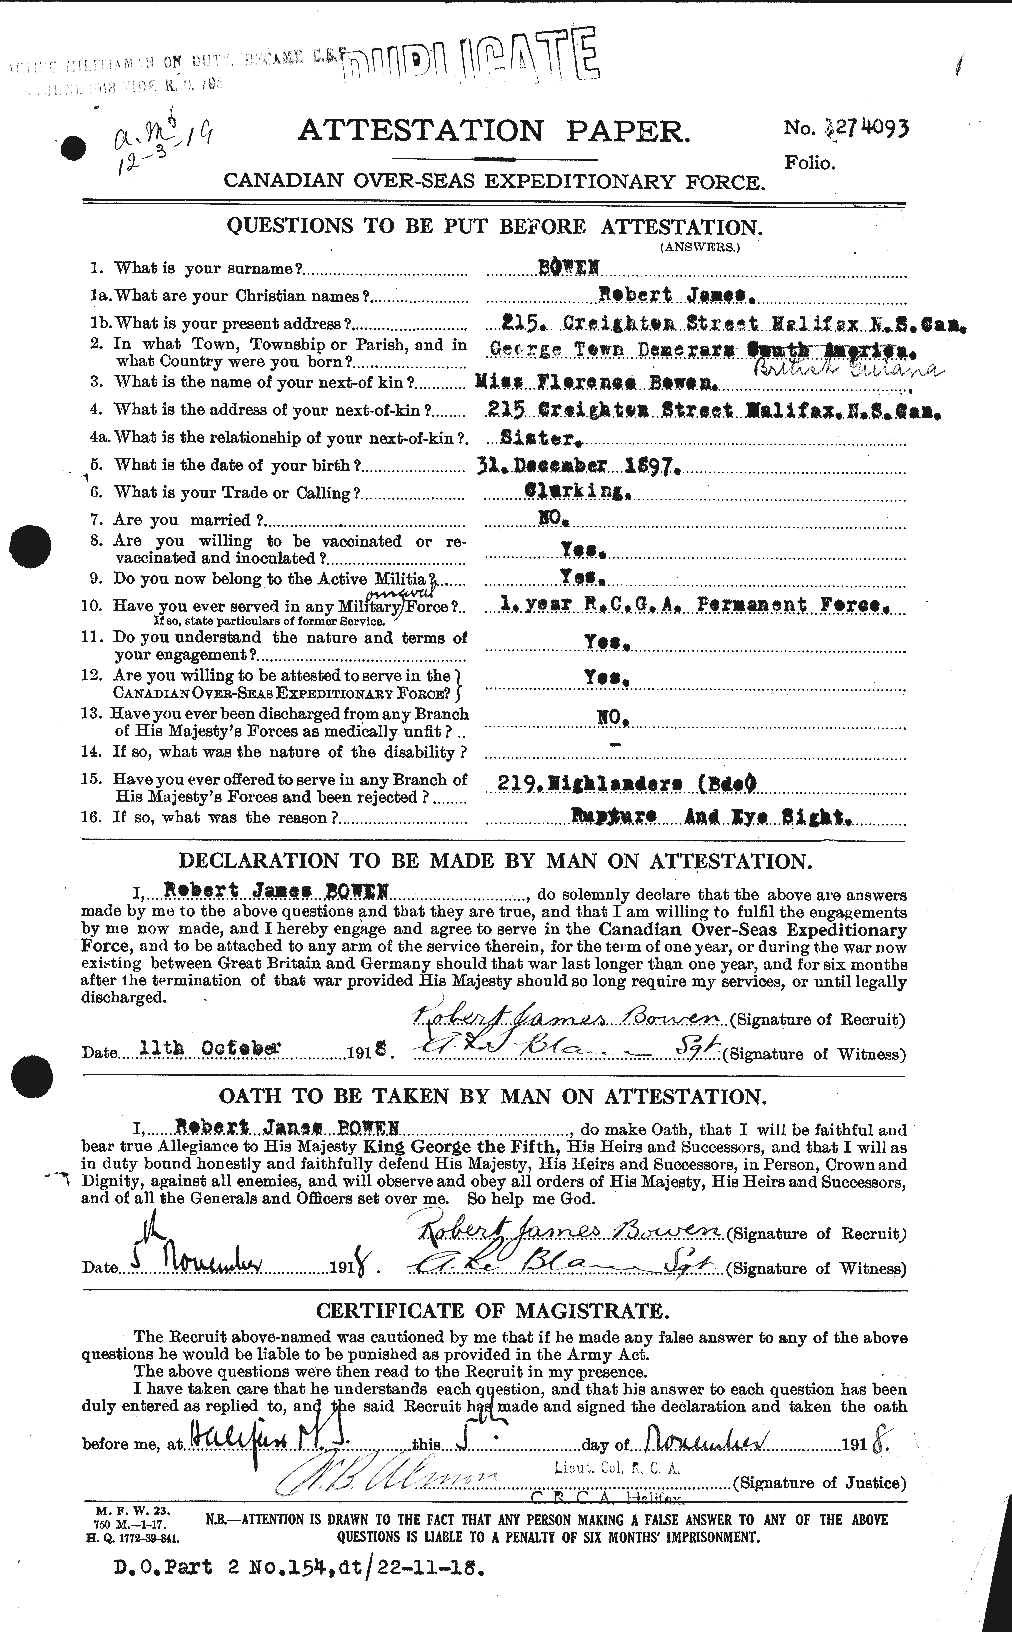 Personnel Records of the First World War - CEF 255465a